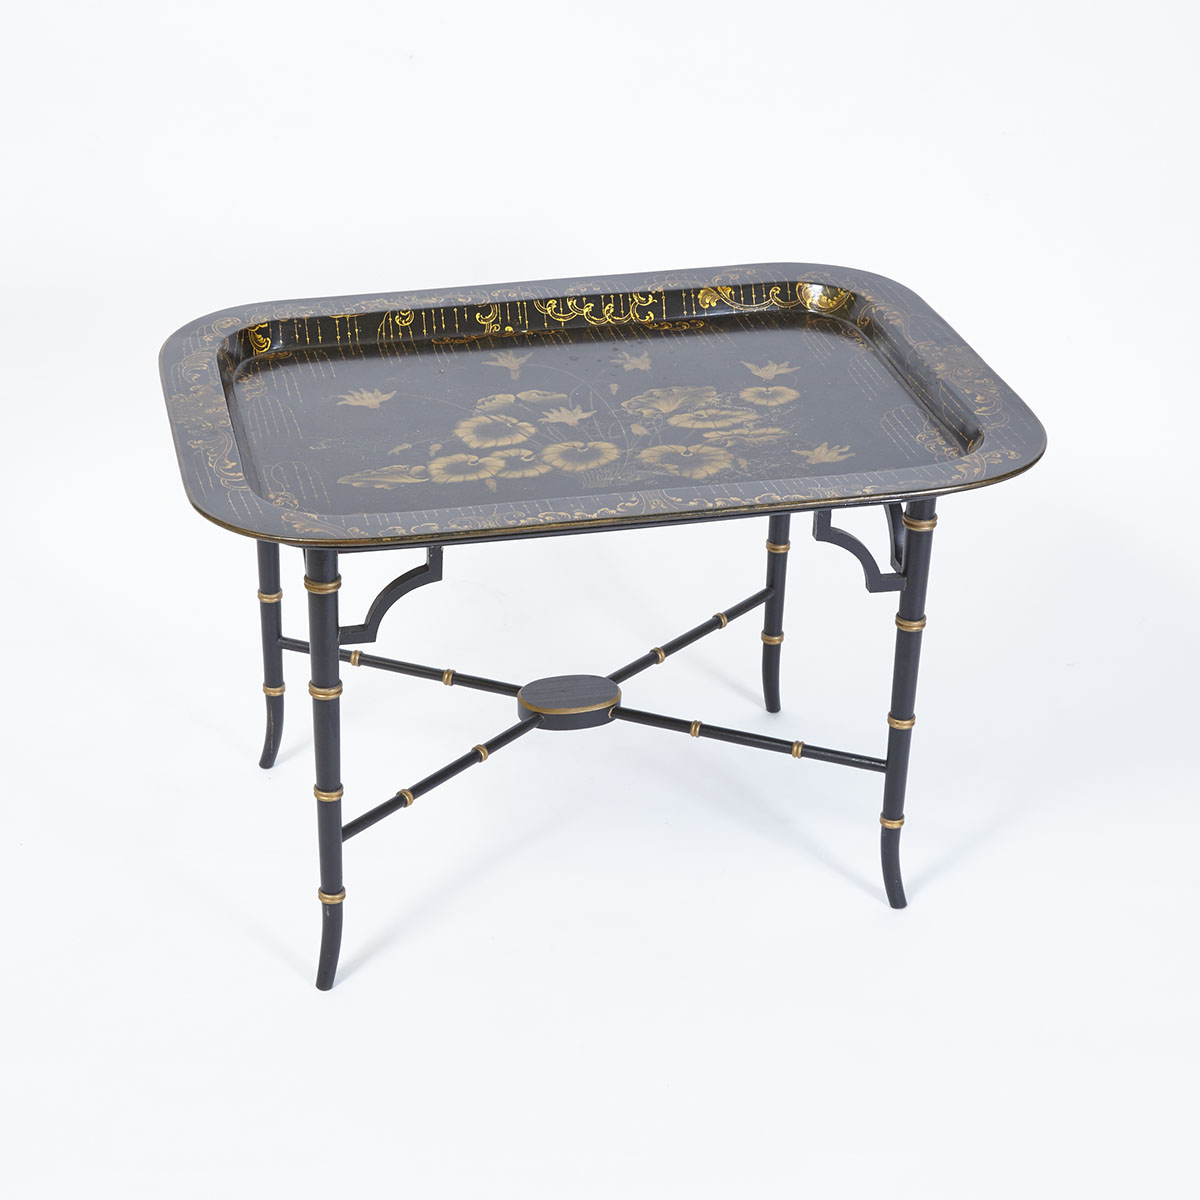 Papier Mache Tray Table and Stand, English, early 19th century